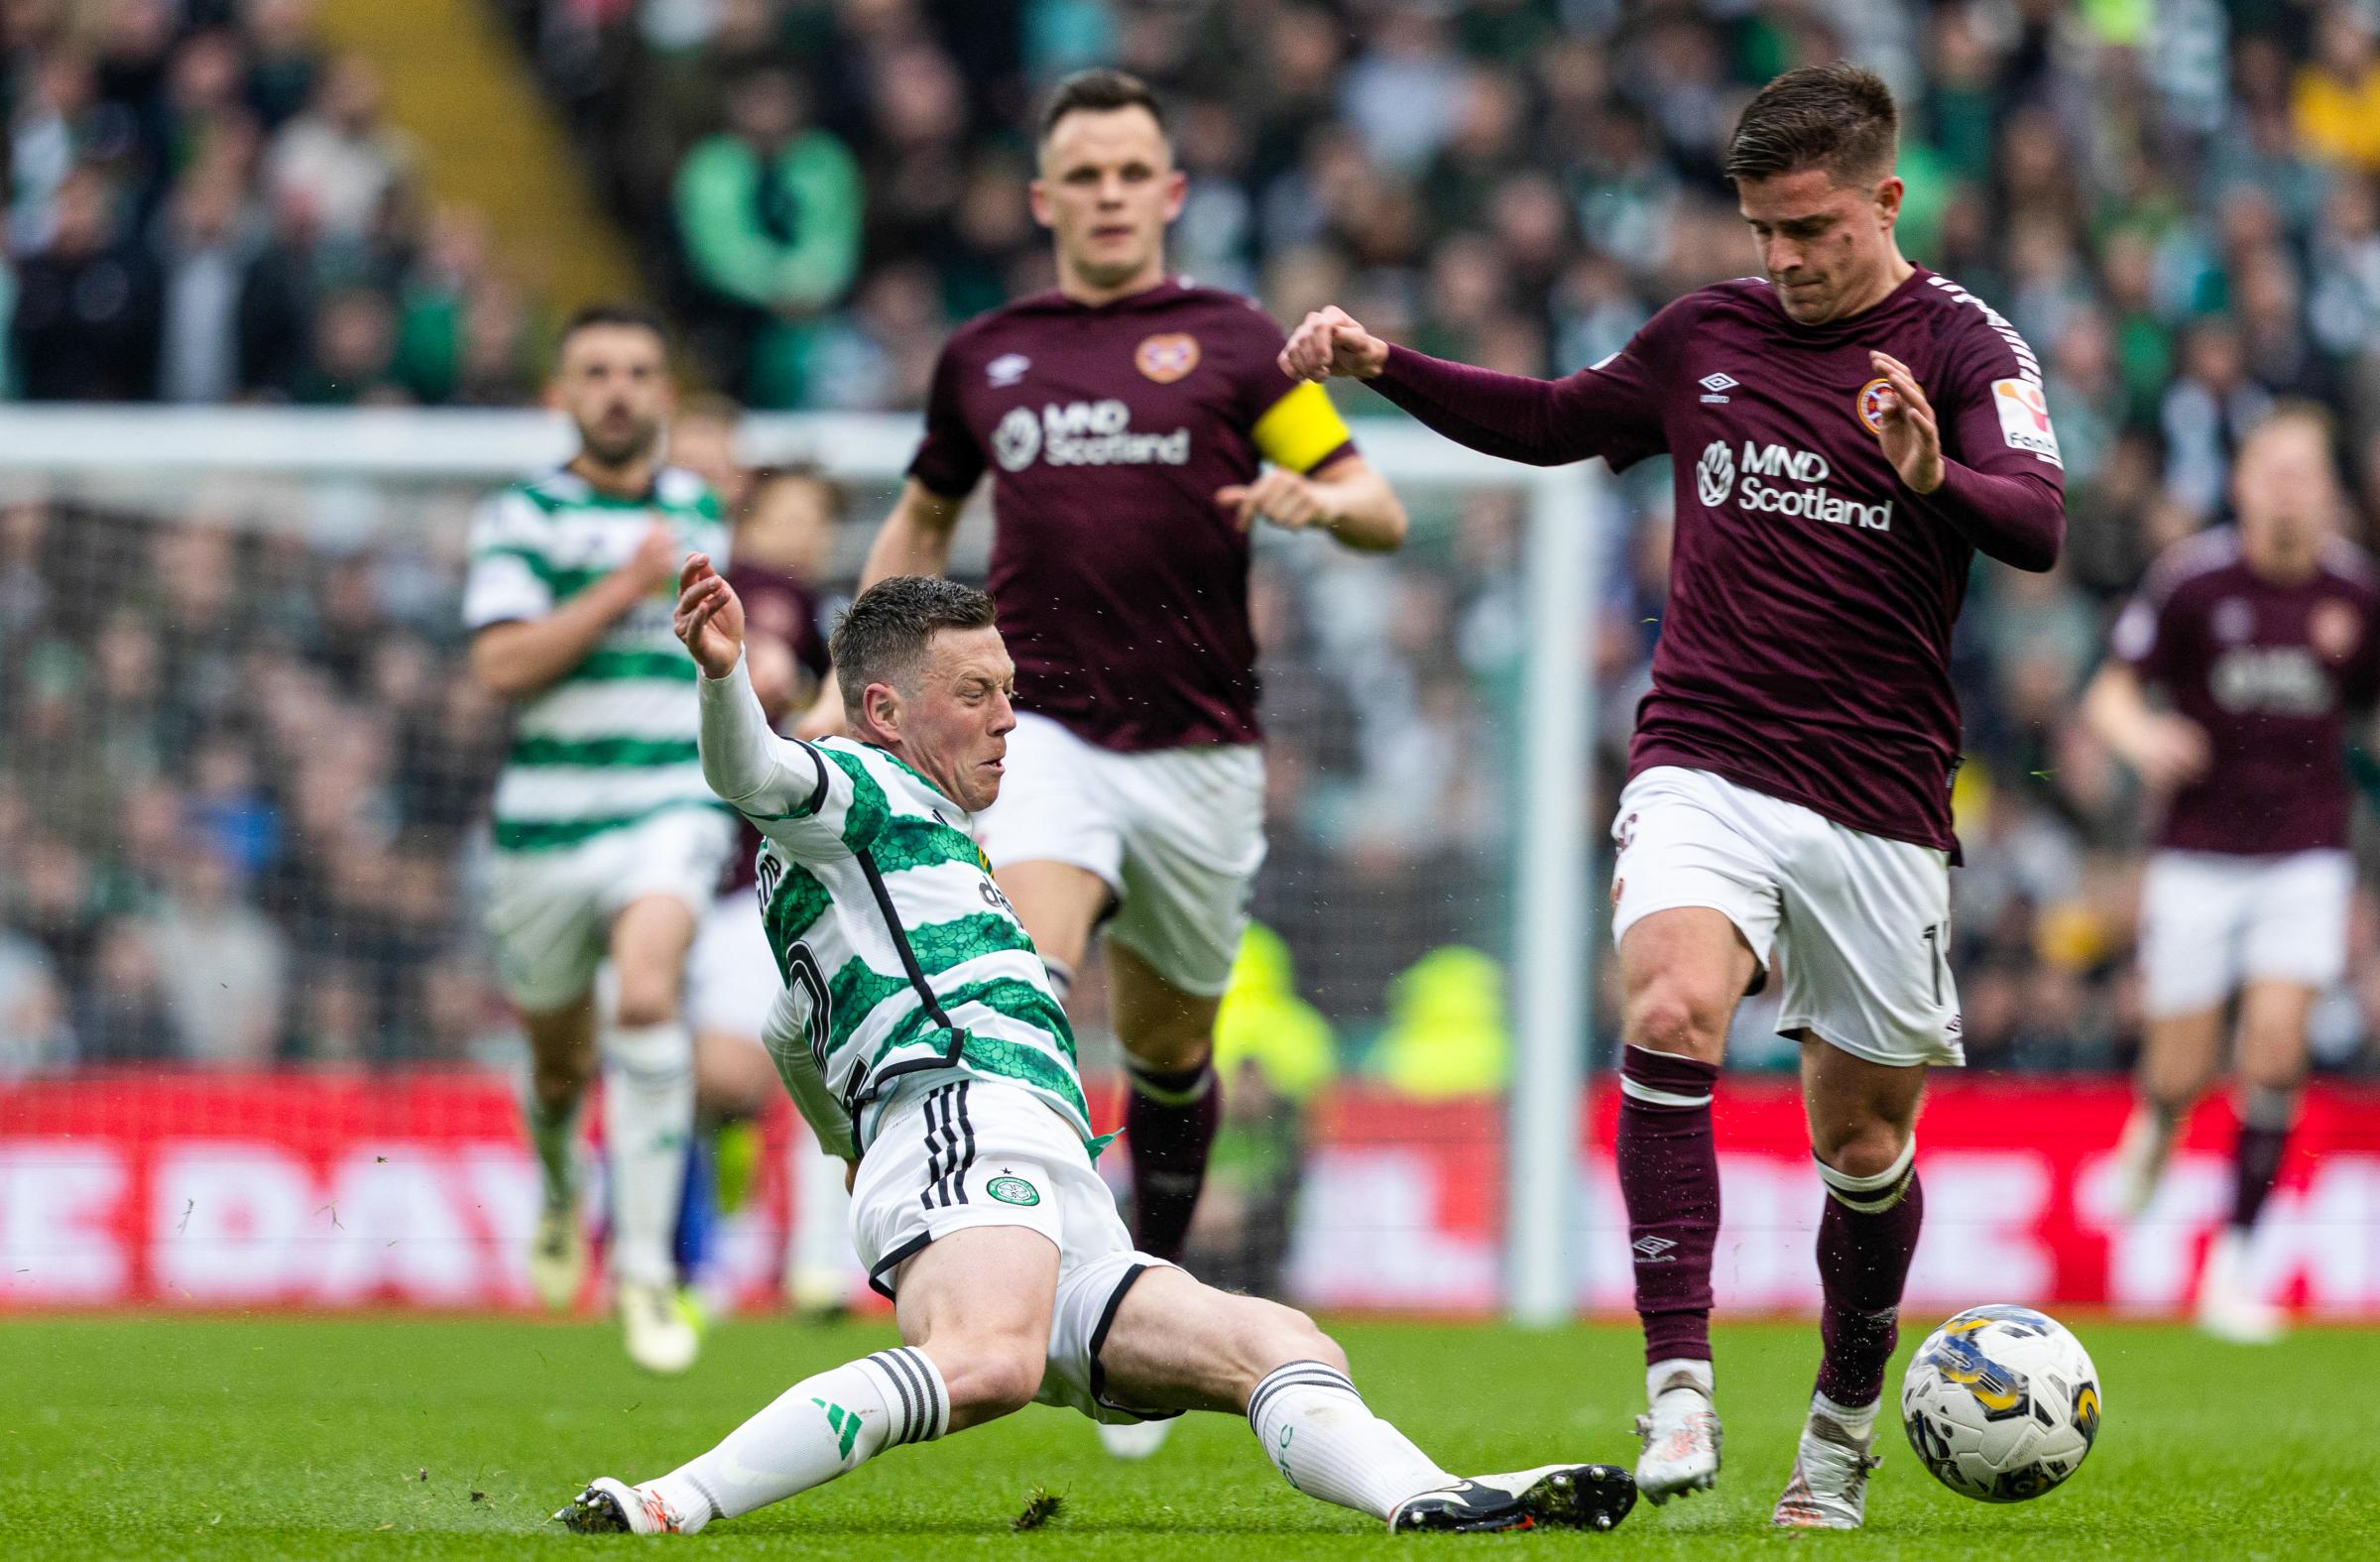 McGregor believes this one Hearts moment was a tone-setter